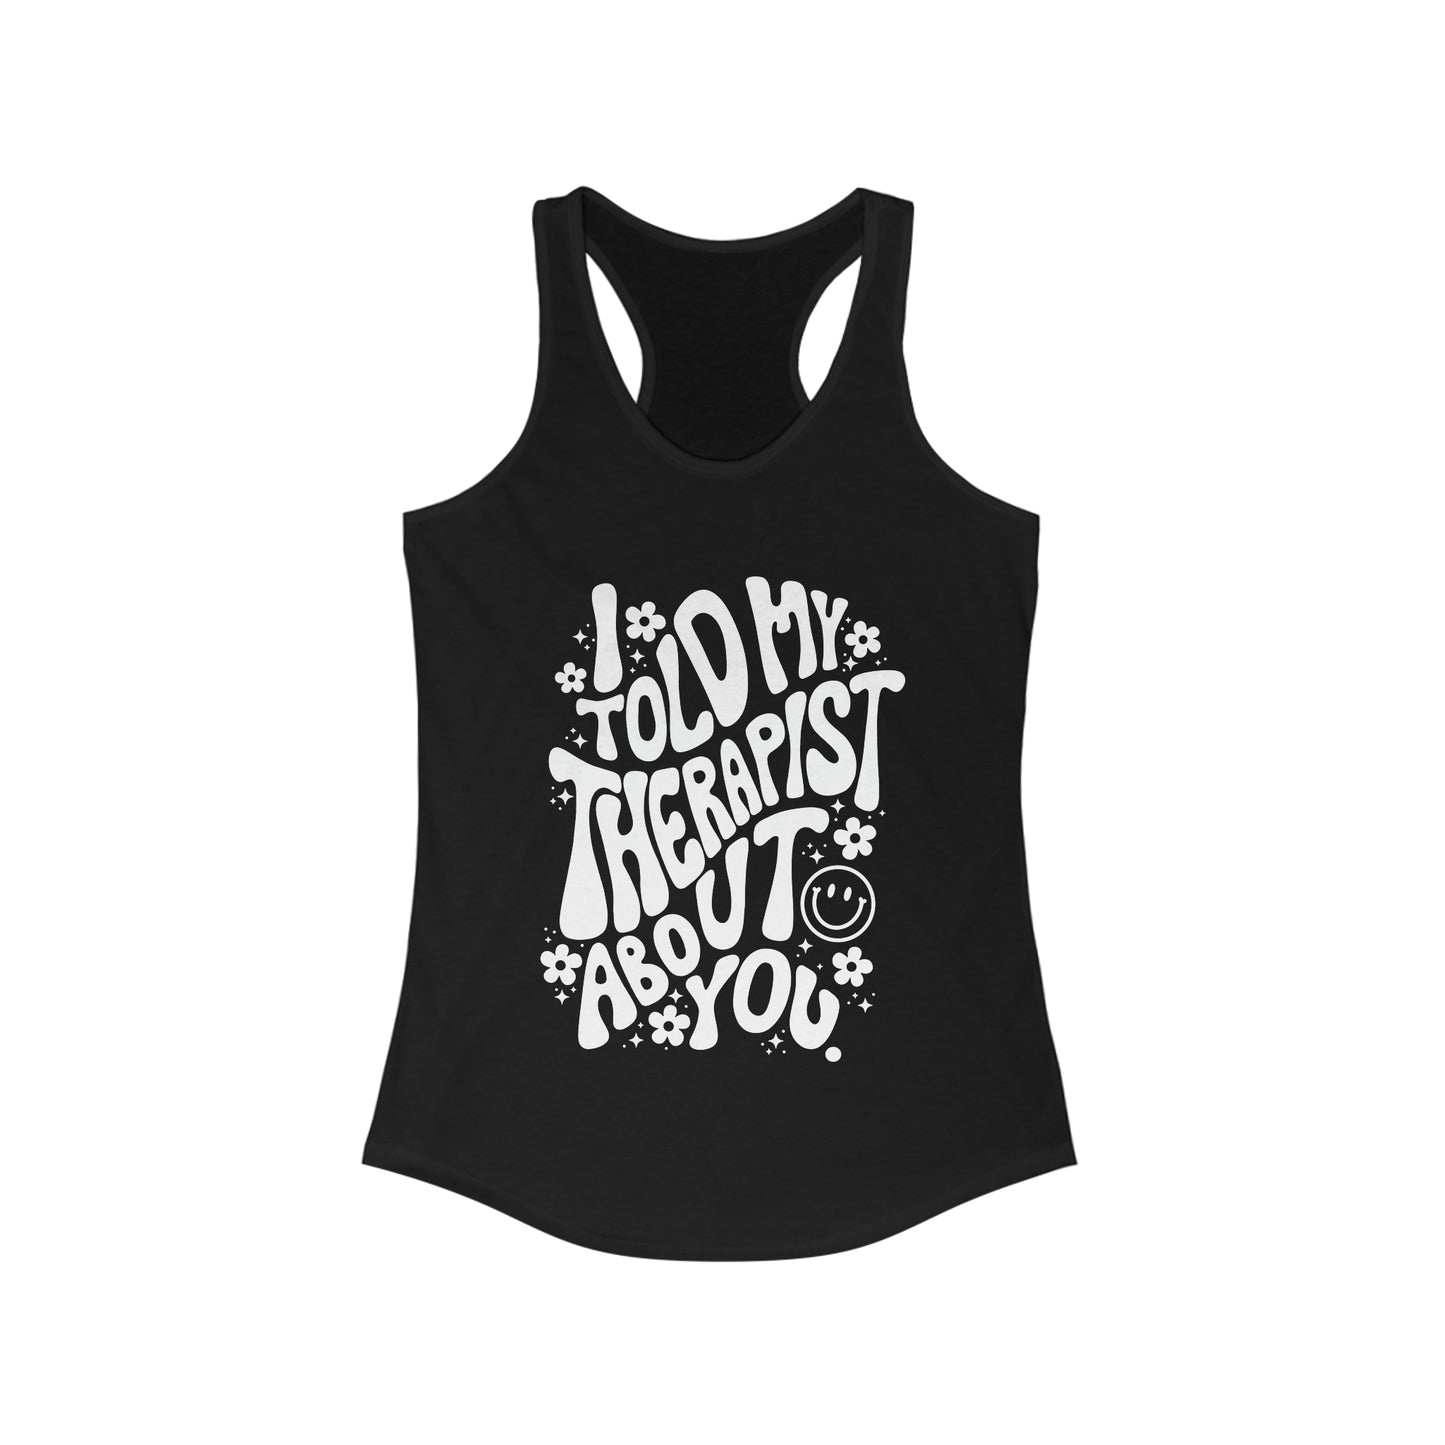 I Told My Therapist About You Tank Top